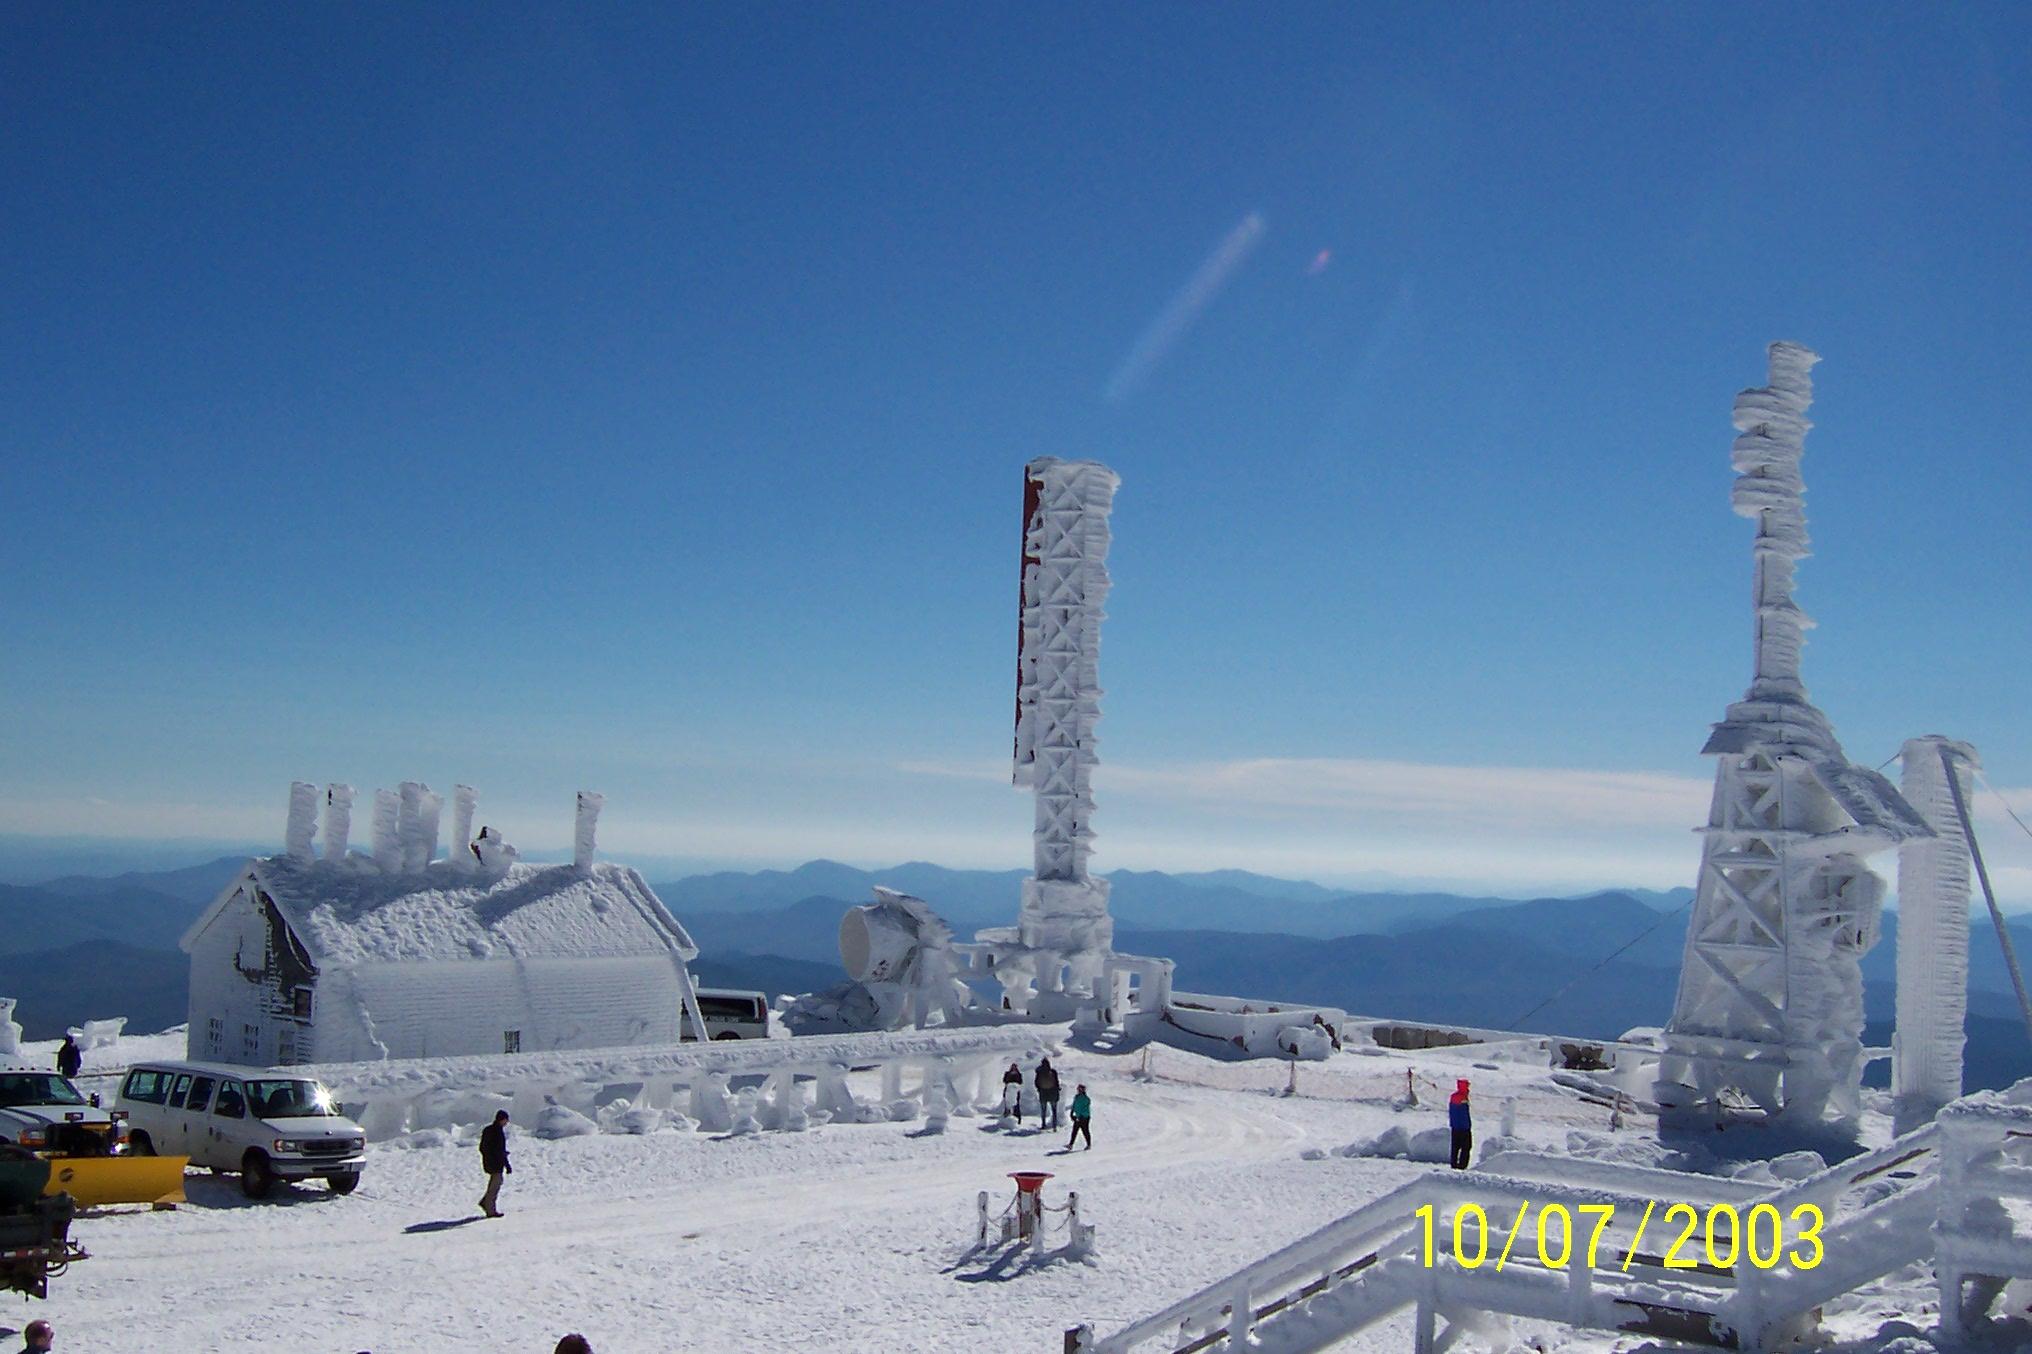 Snow On Mt. Washington (user submitted)